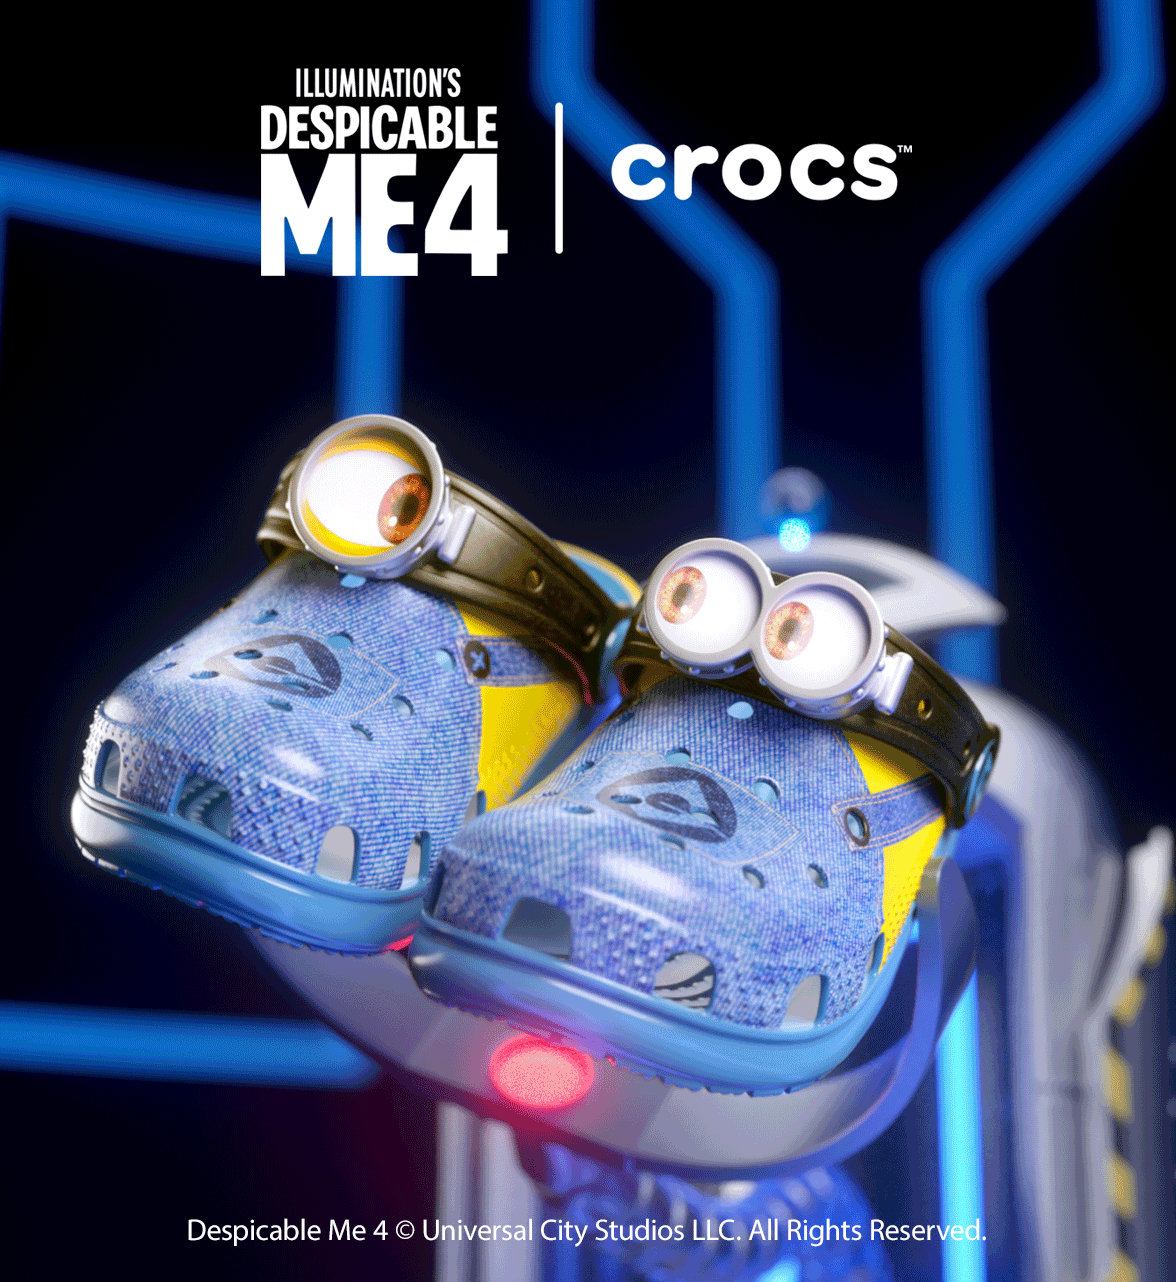 gif of descipable me x crocs collab now available in adult and kids sizes